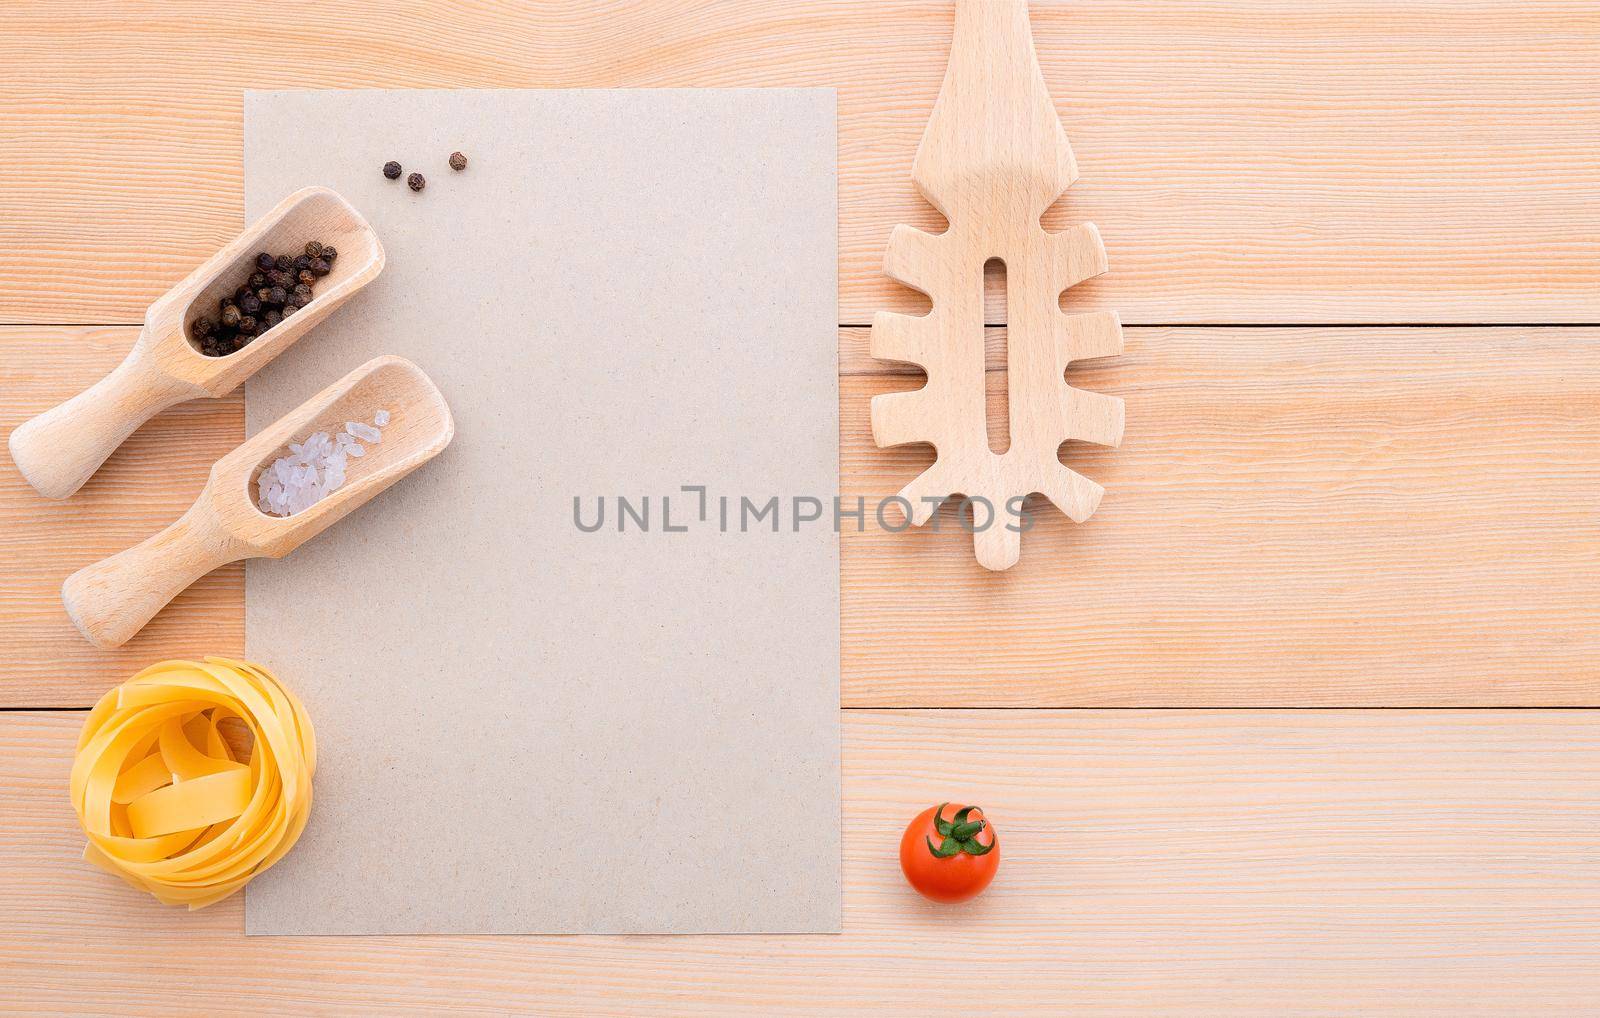 Food background for tasty Italian dishes with blank brown paper and vintage pasta ladle on wooden background. Top view italian foods concept and menu design with copy space.